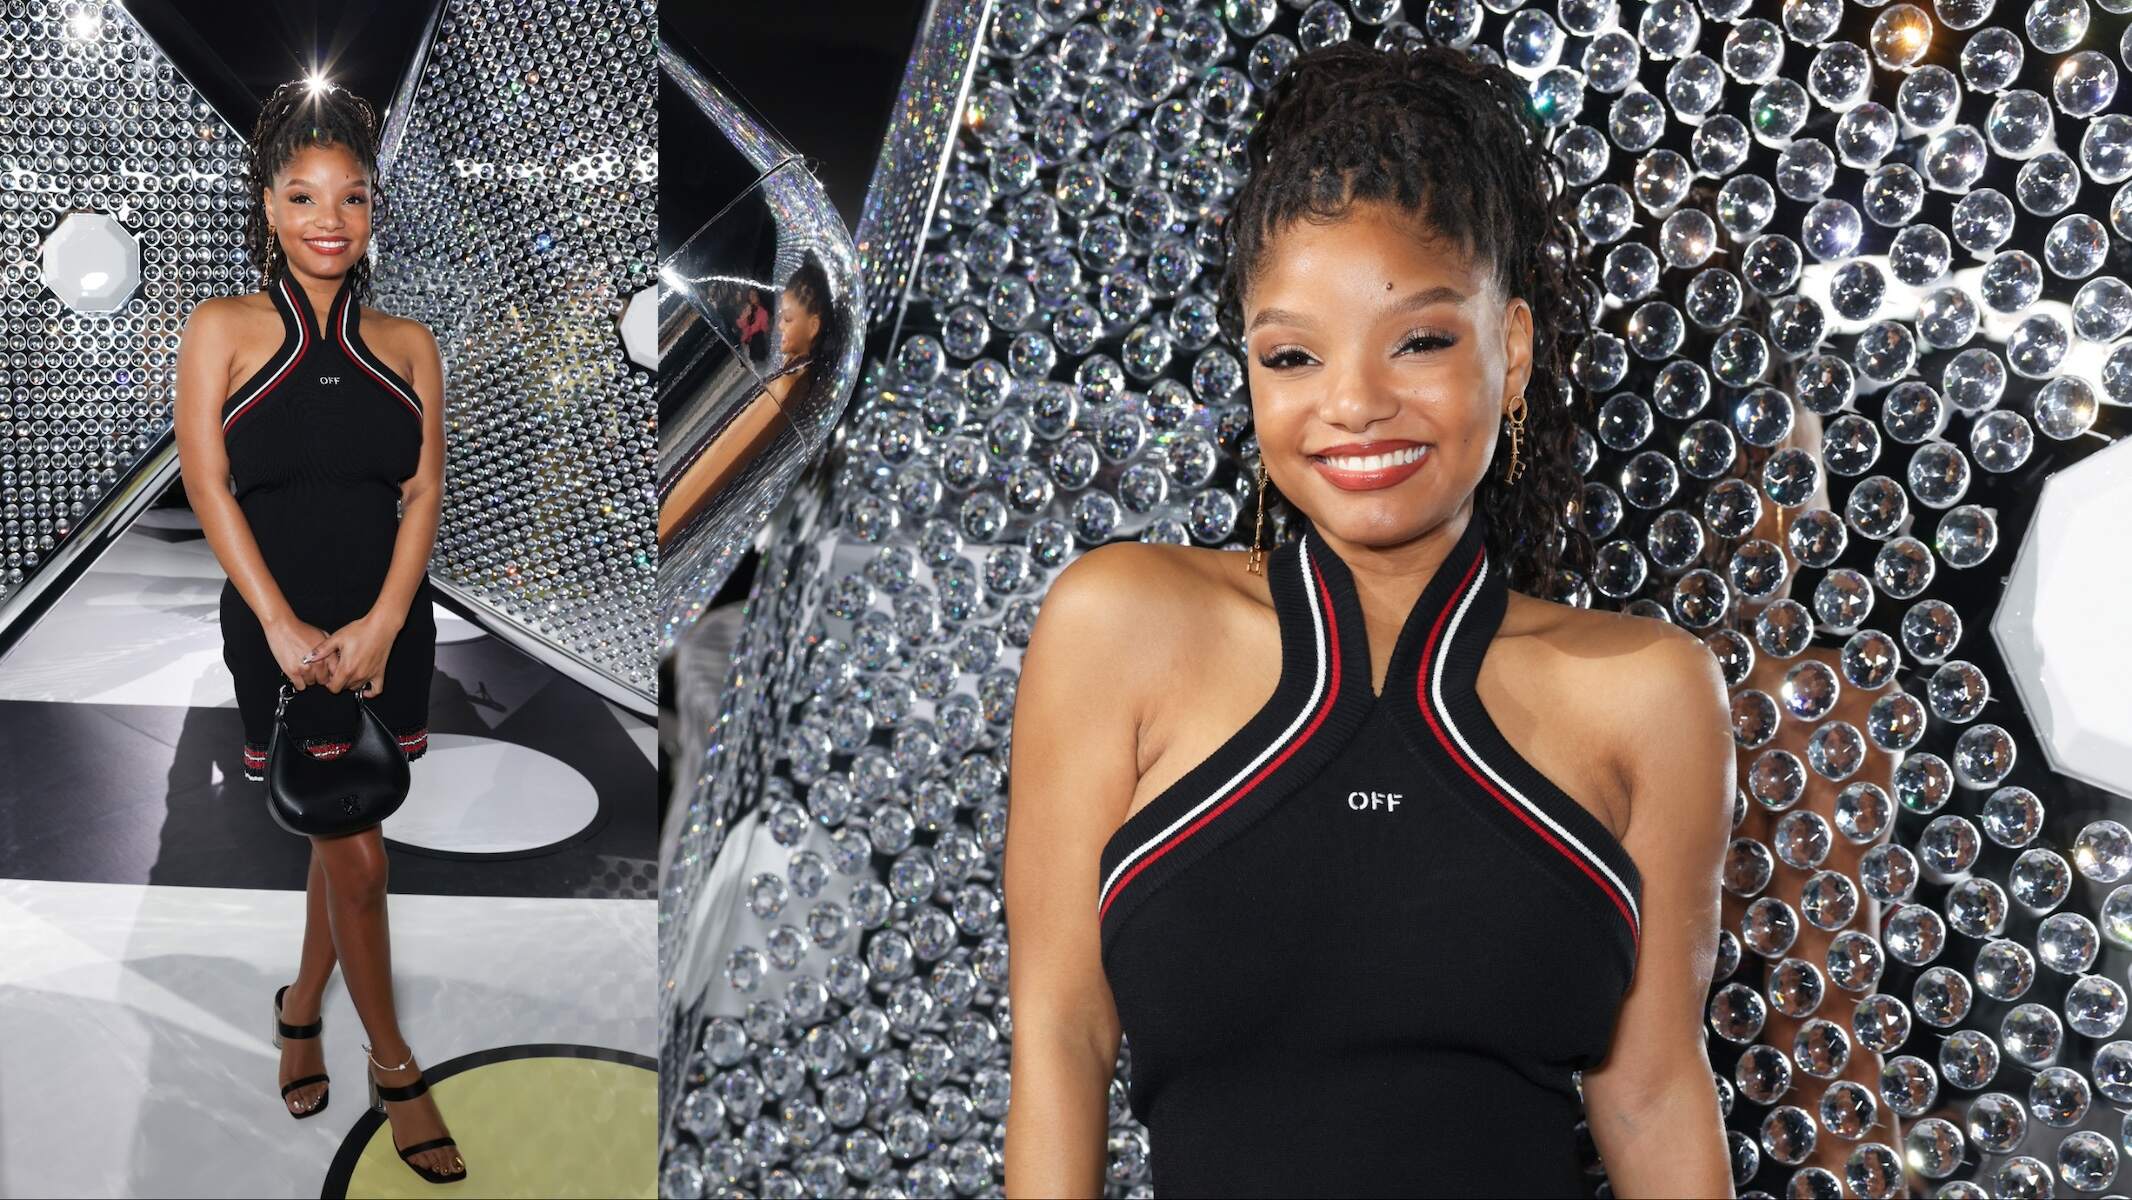 Actor Halle Bailey poses for cameras in a red and black outfit before the Off White runway show